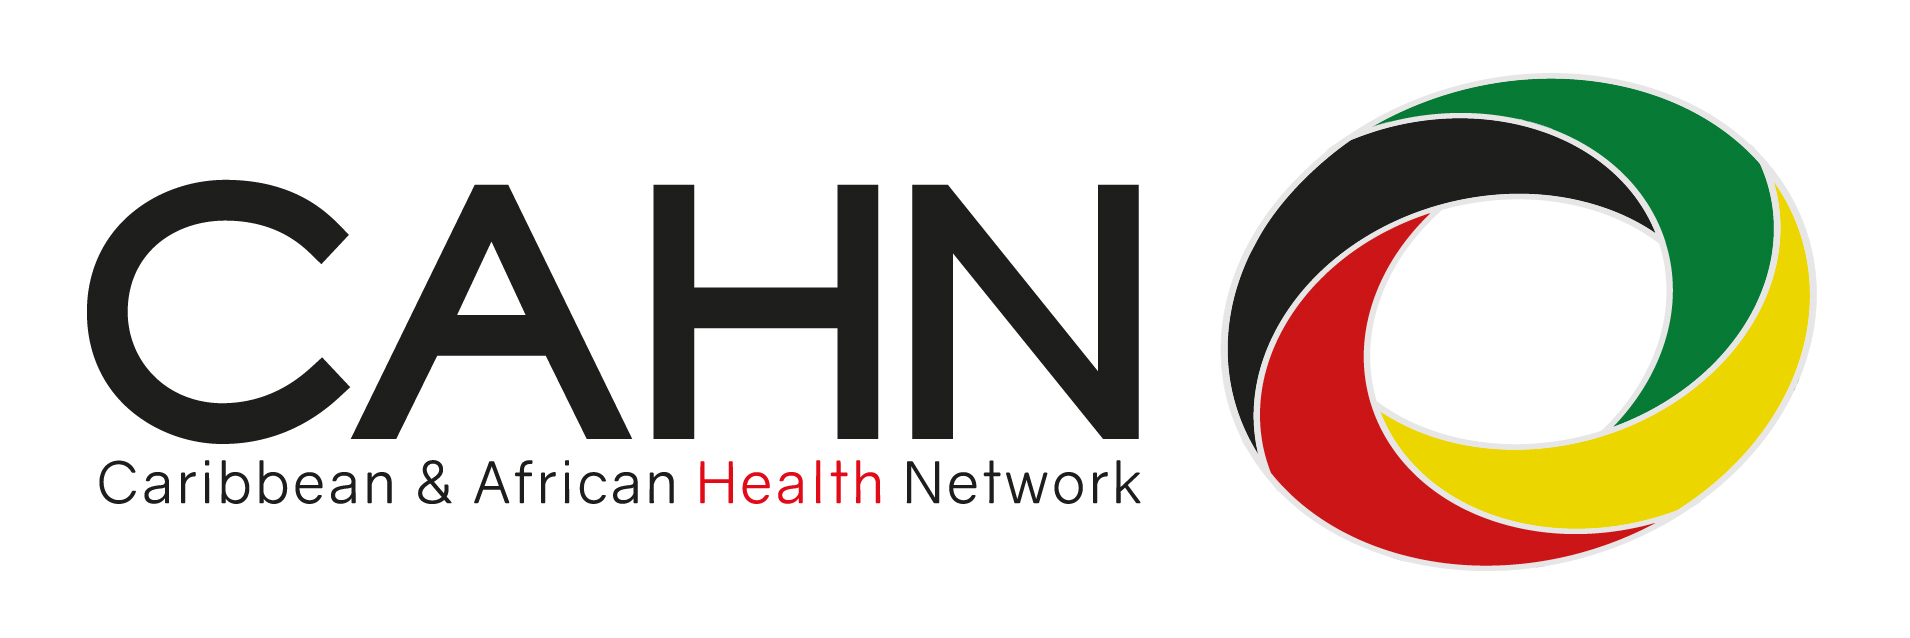 logo for Caribbean & African Health Network